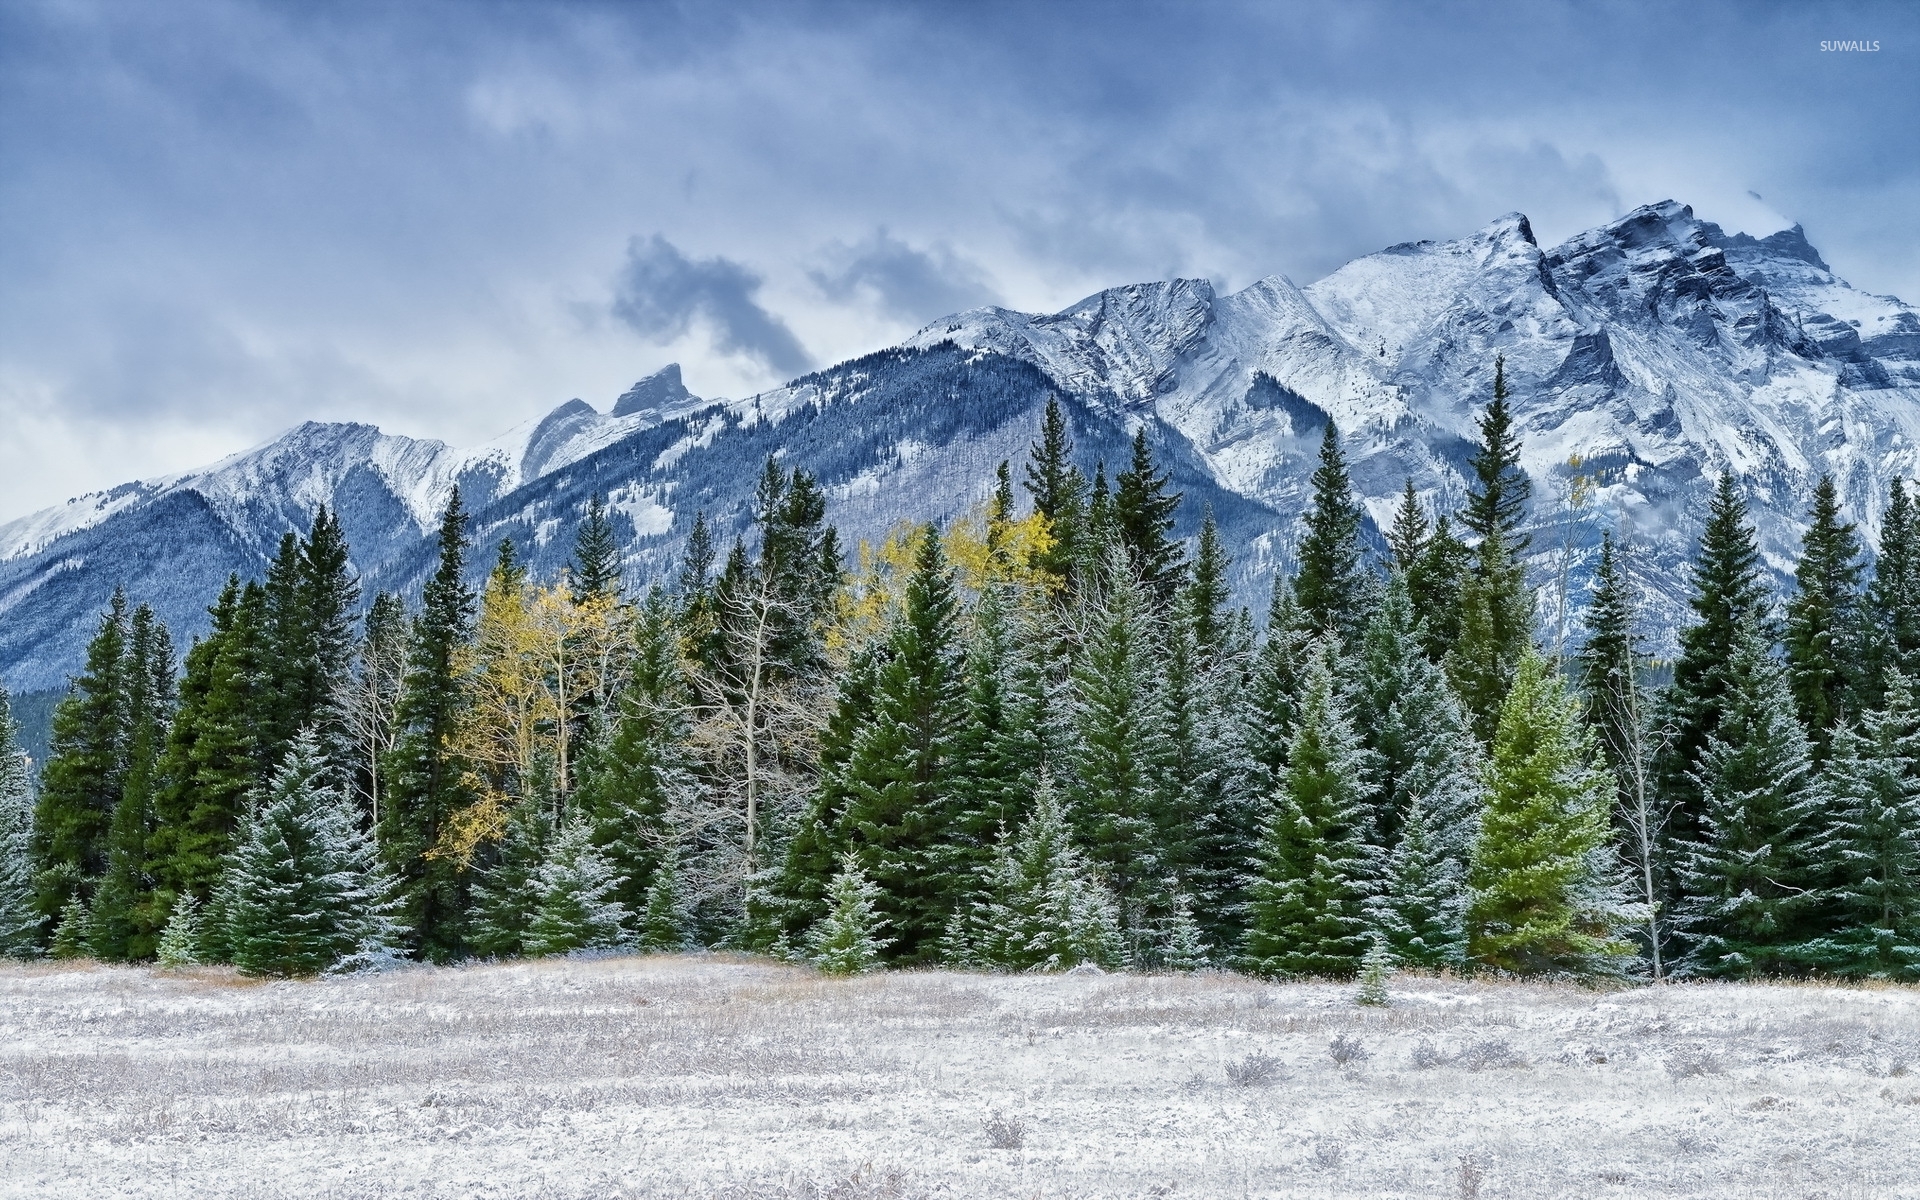 Snowy pine forest by the rocky mountains wallpaper - Nature wallpapers